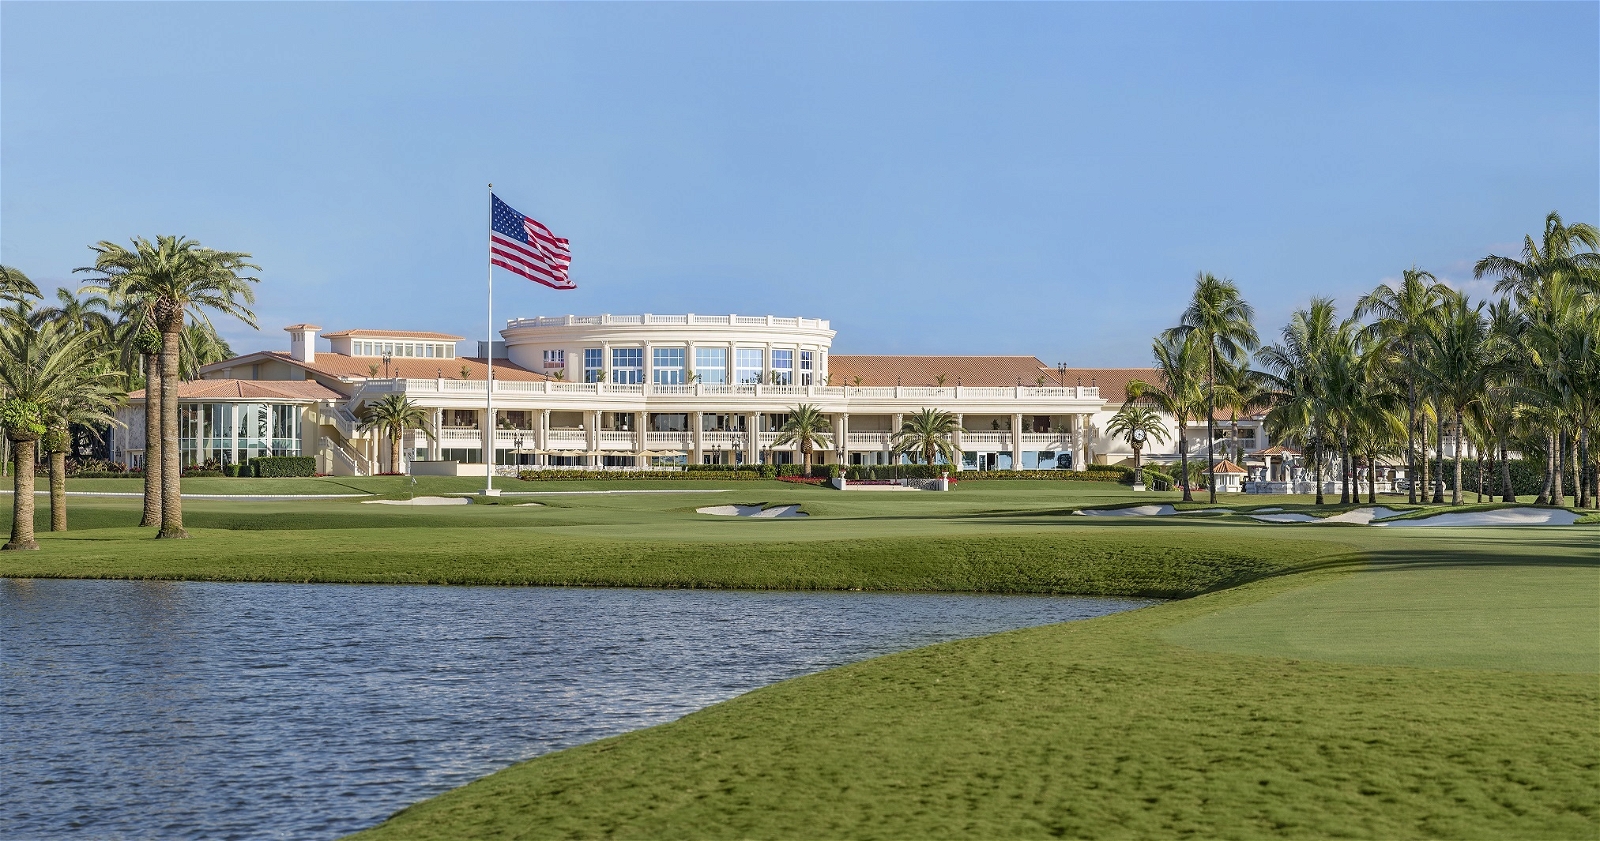 Golf Vacation Package - Spring Deal : Doral Resort and the Blue Monster Stay & Play + FREE REPLAYS from $451 per day!